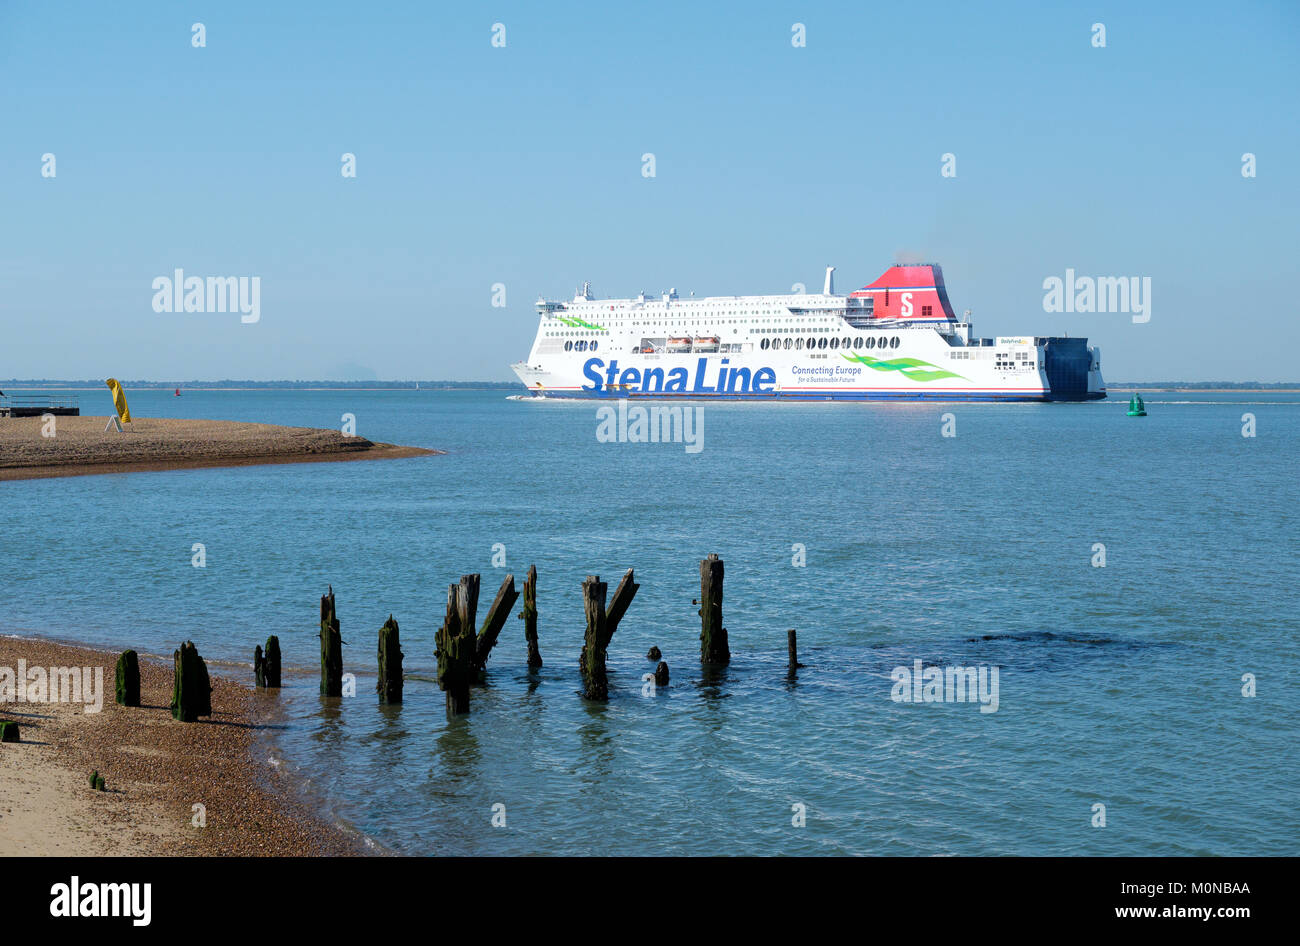 The Stena Line RoPax (roll-on/roll-off/passenger accomodation) ferry, Stena Brittanica departs from Harwich en route to the Hook of Holland, Felixstow Stock Photo